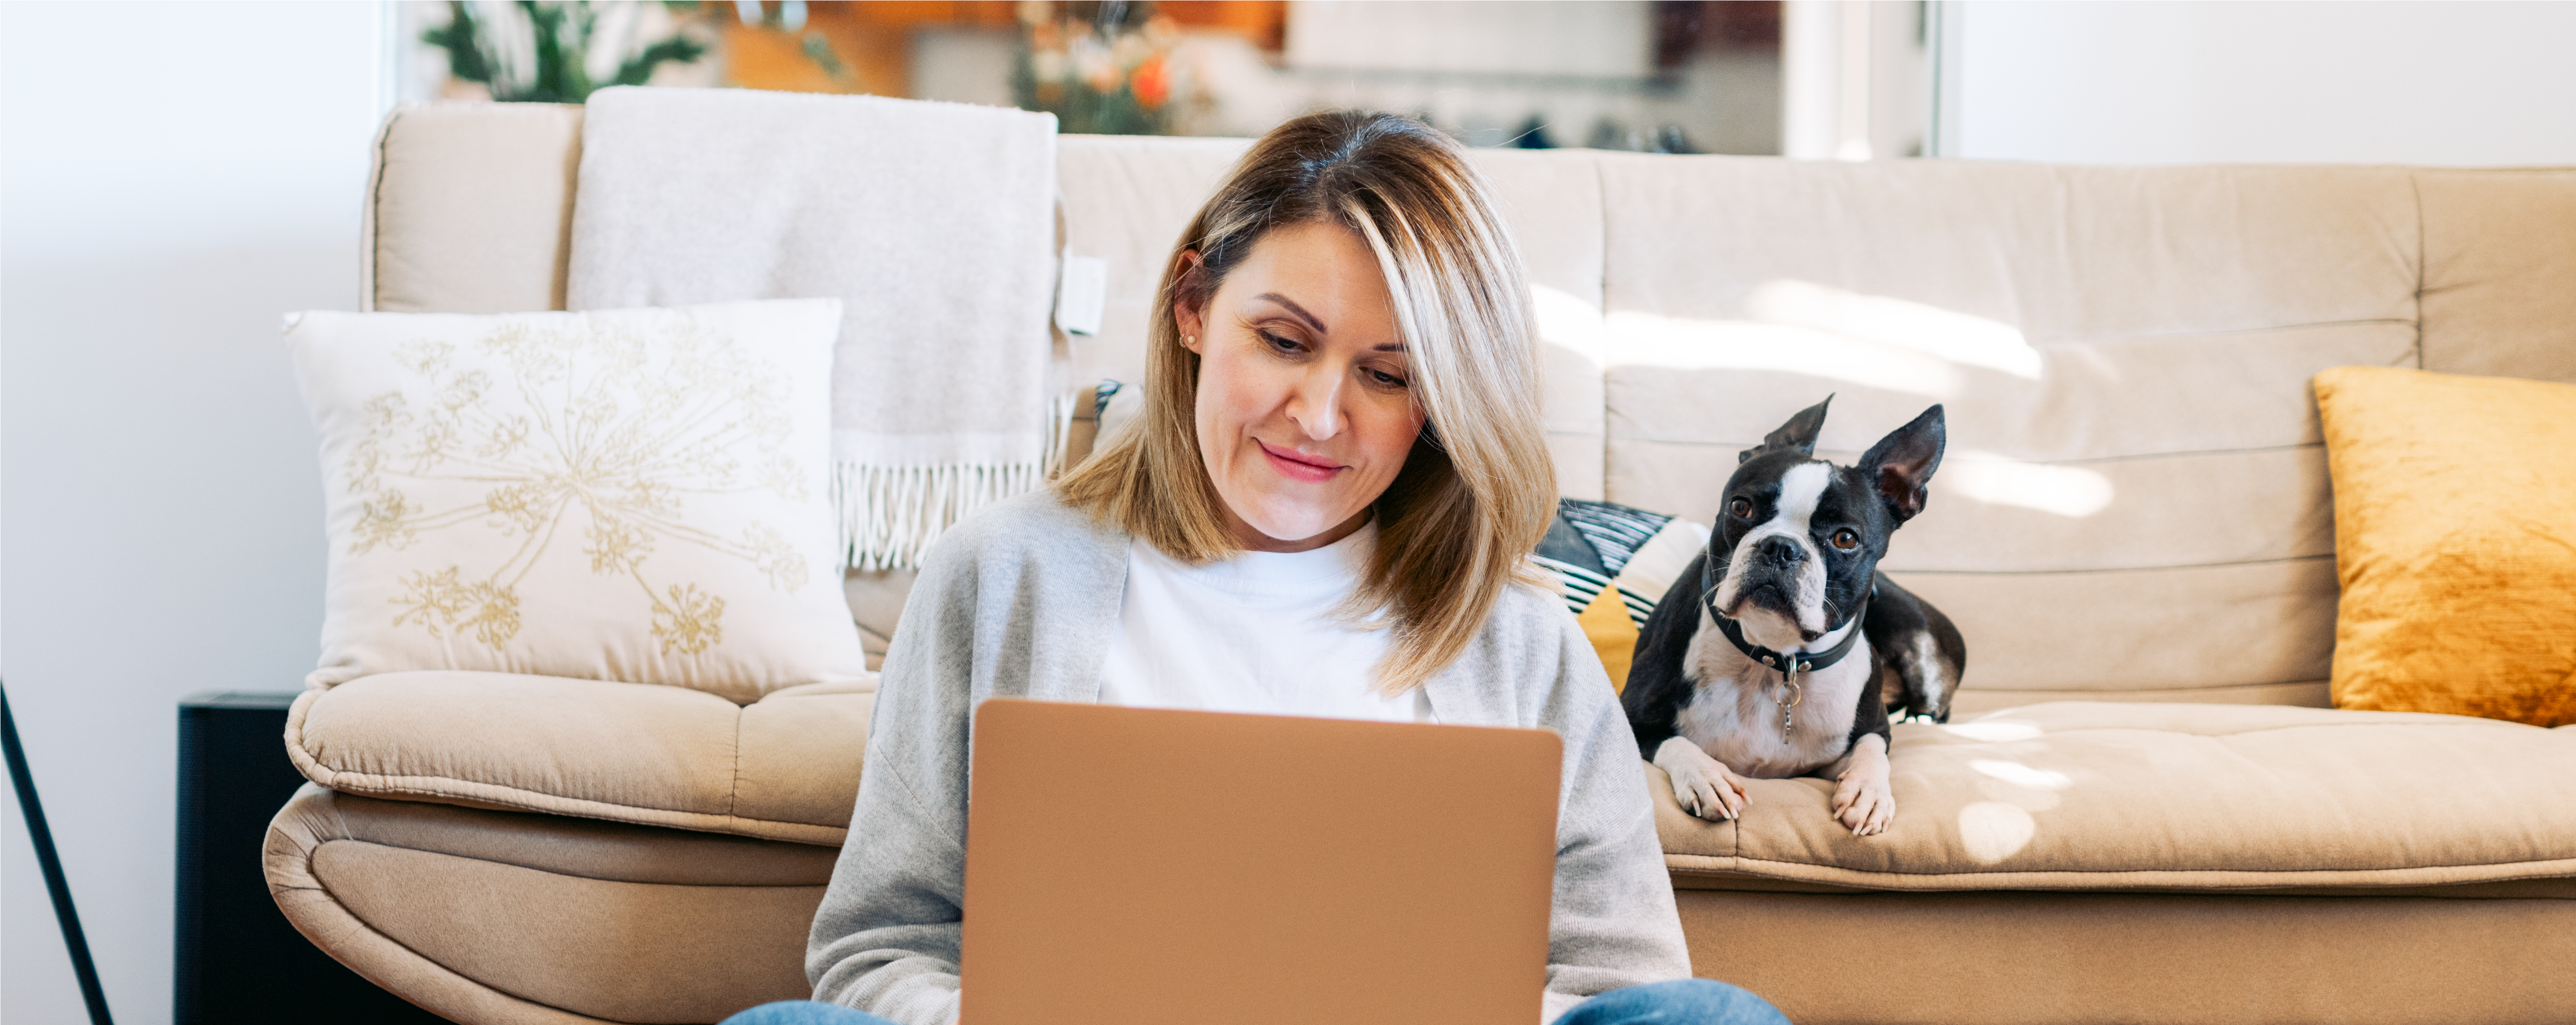 Woman working with a laptop or shopping online at home with her Boston terrier dog. 